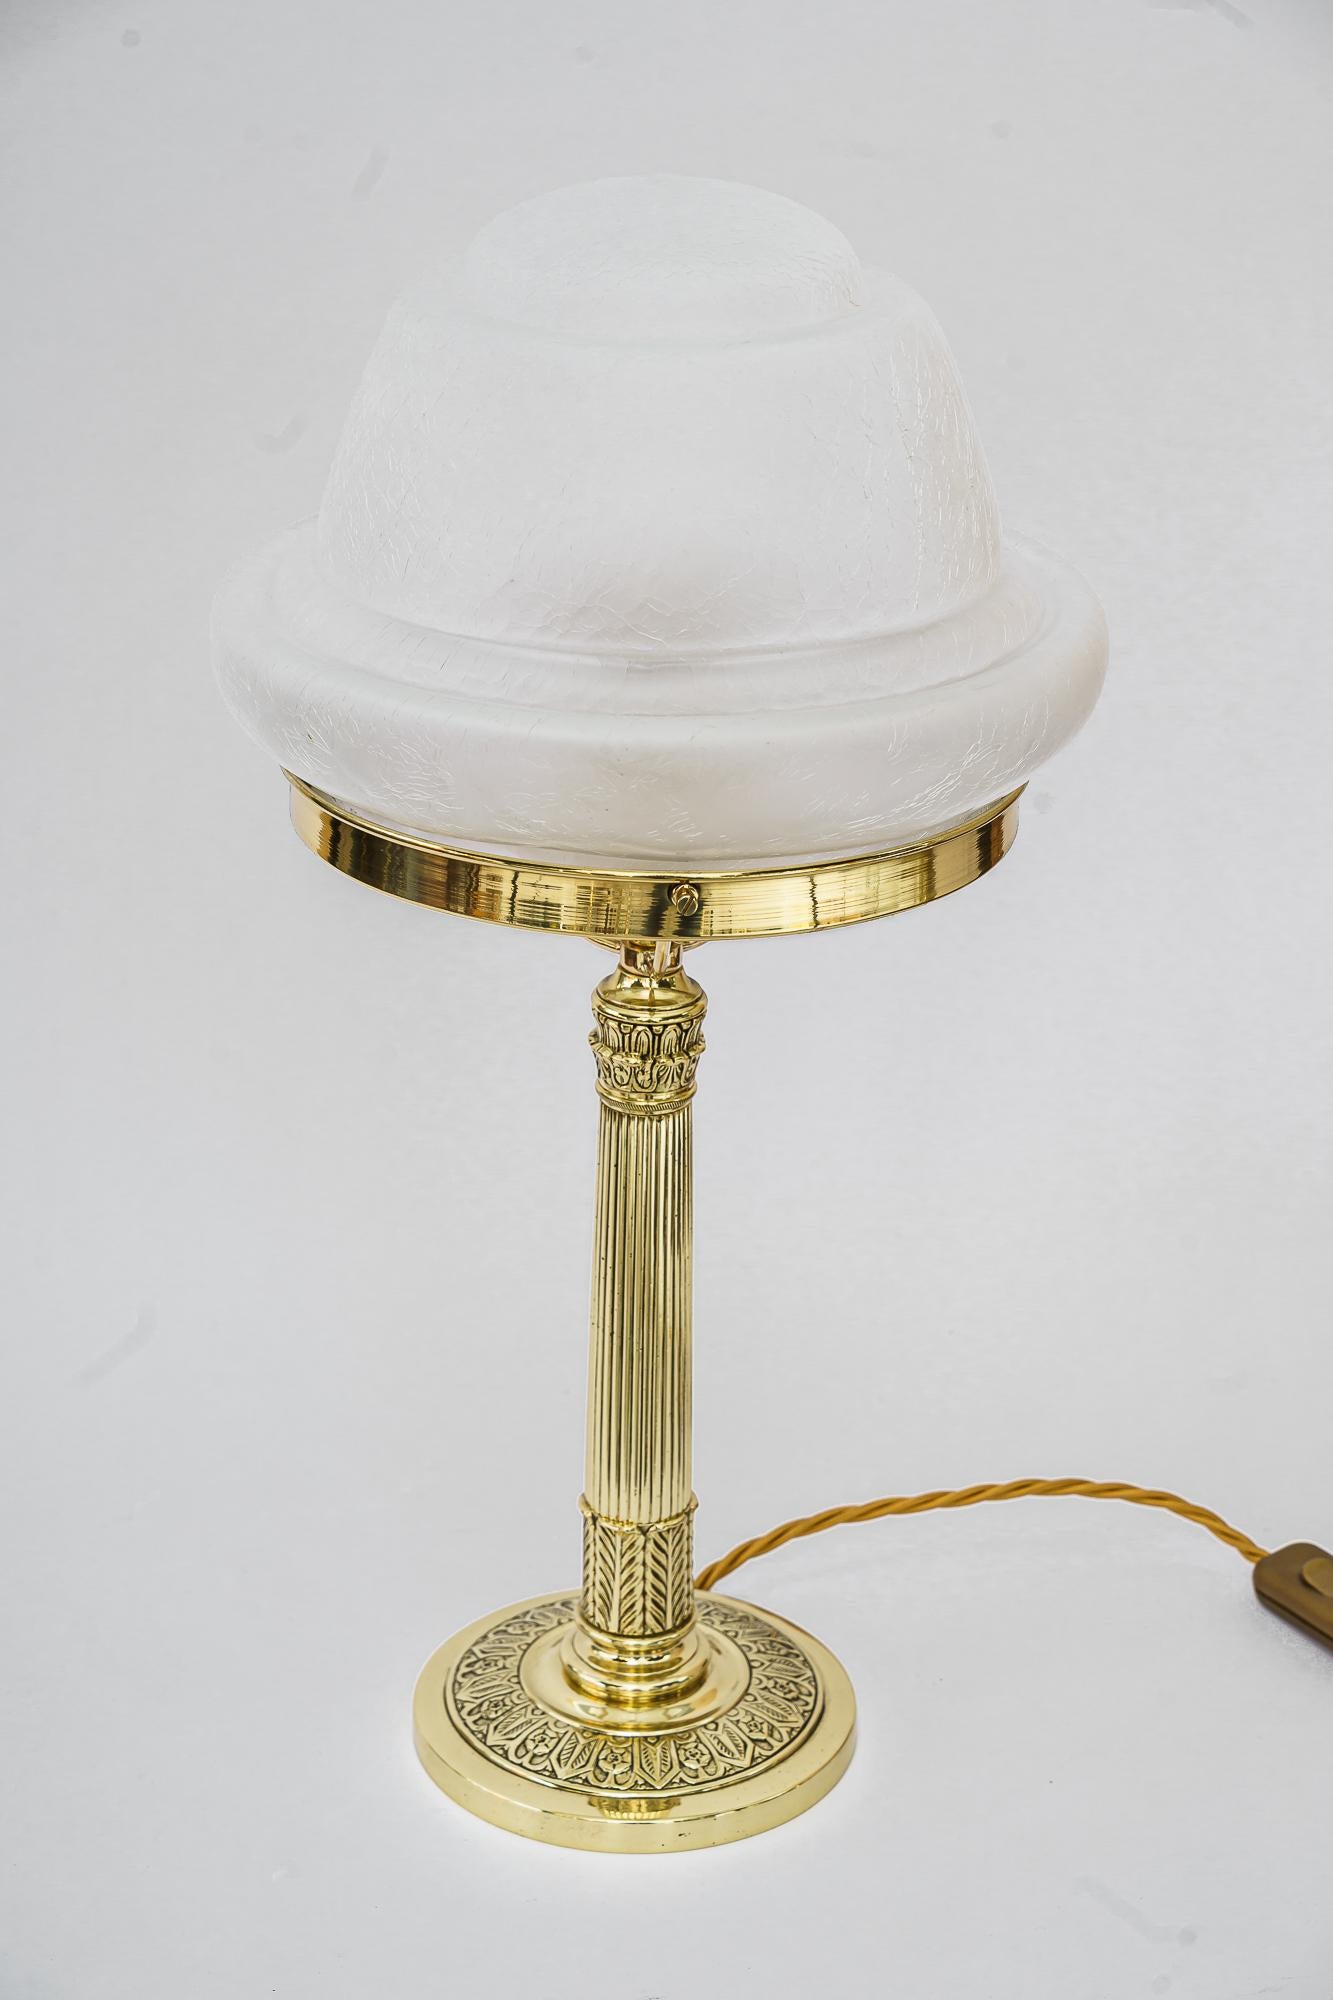 Art Deco Table lamp vienna around 1920s
Polished and stove enameled
Original antique glass shade.